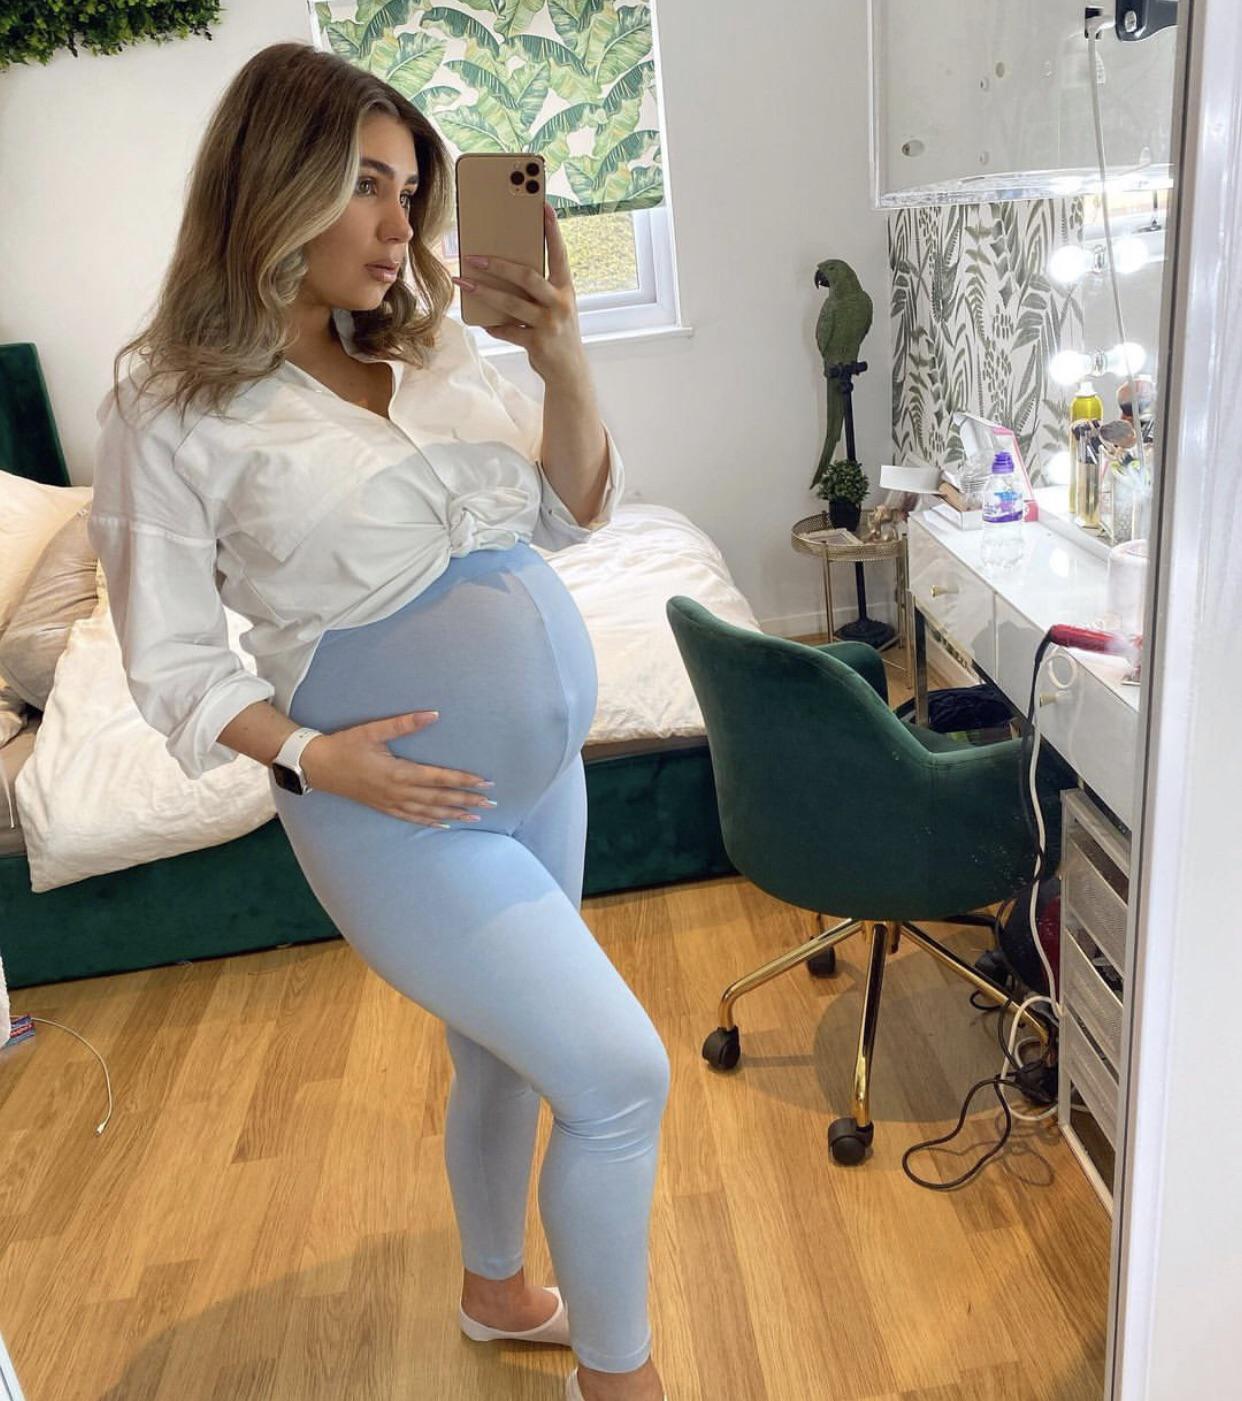 Love Jerking Off To Her Pregnant Pics 🤤 Scrolller